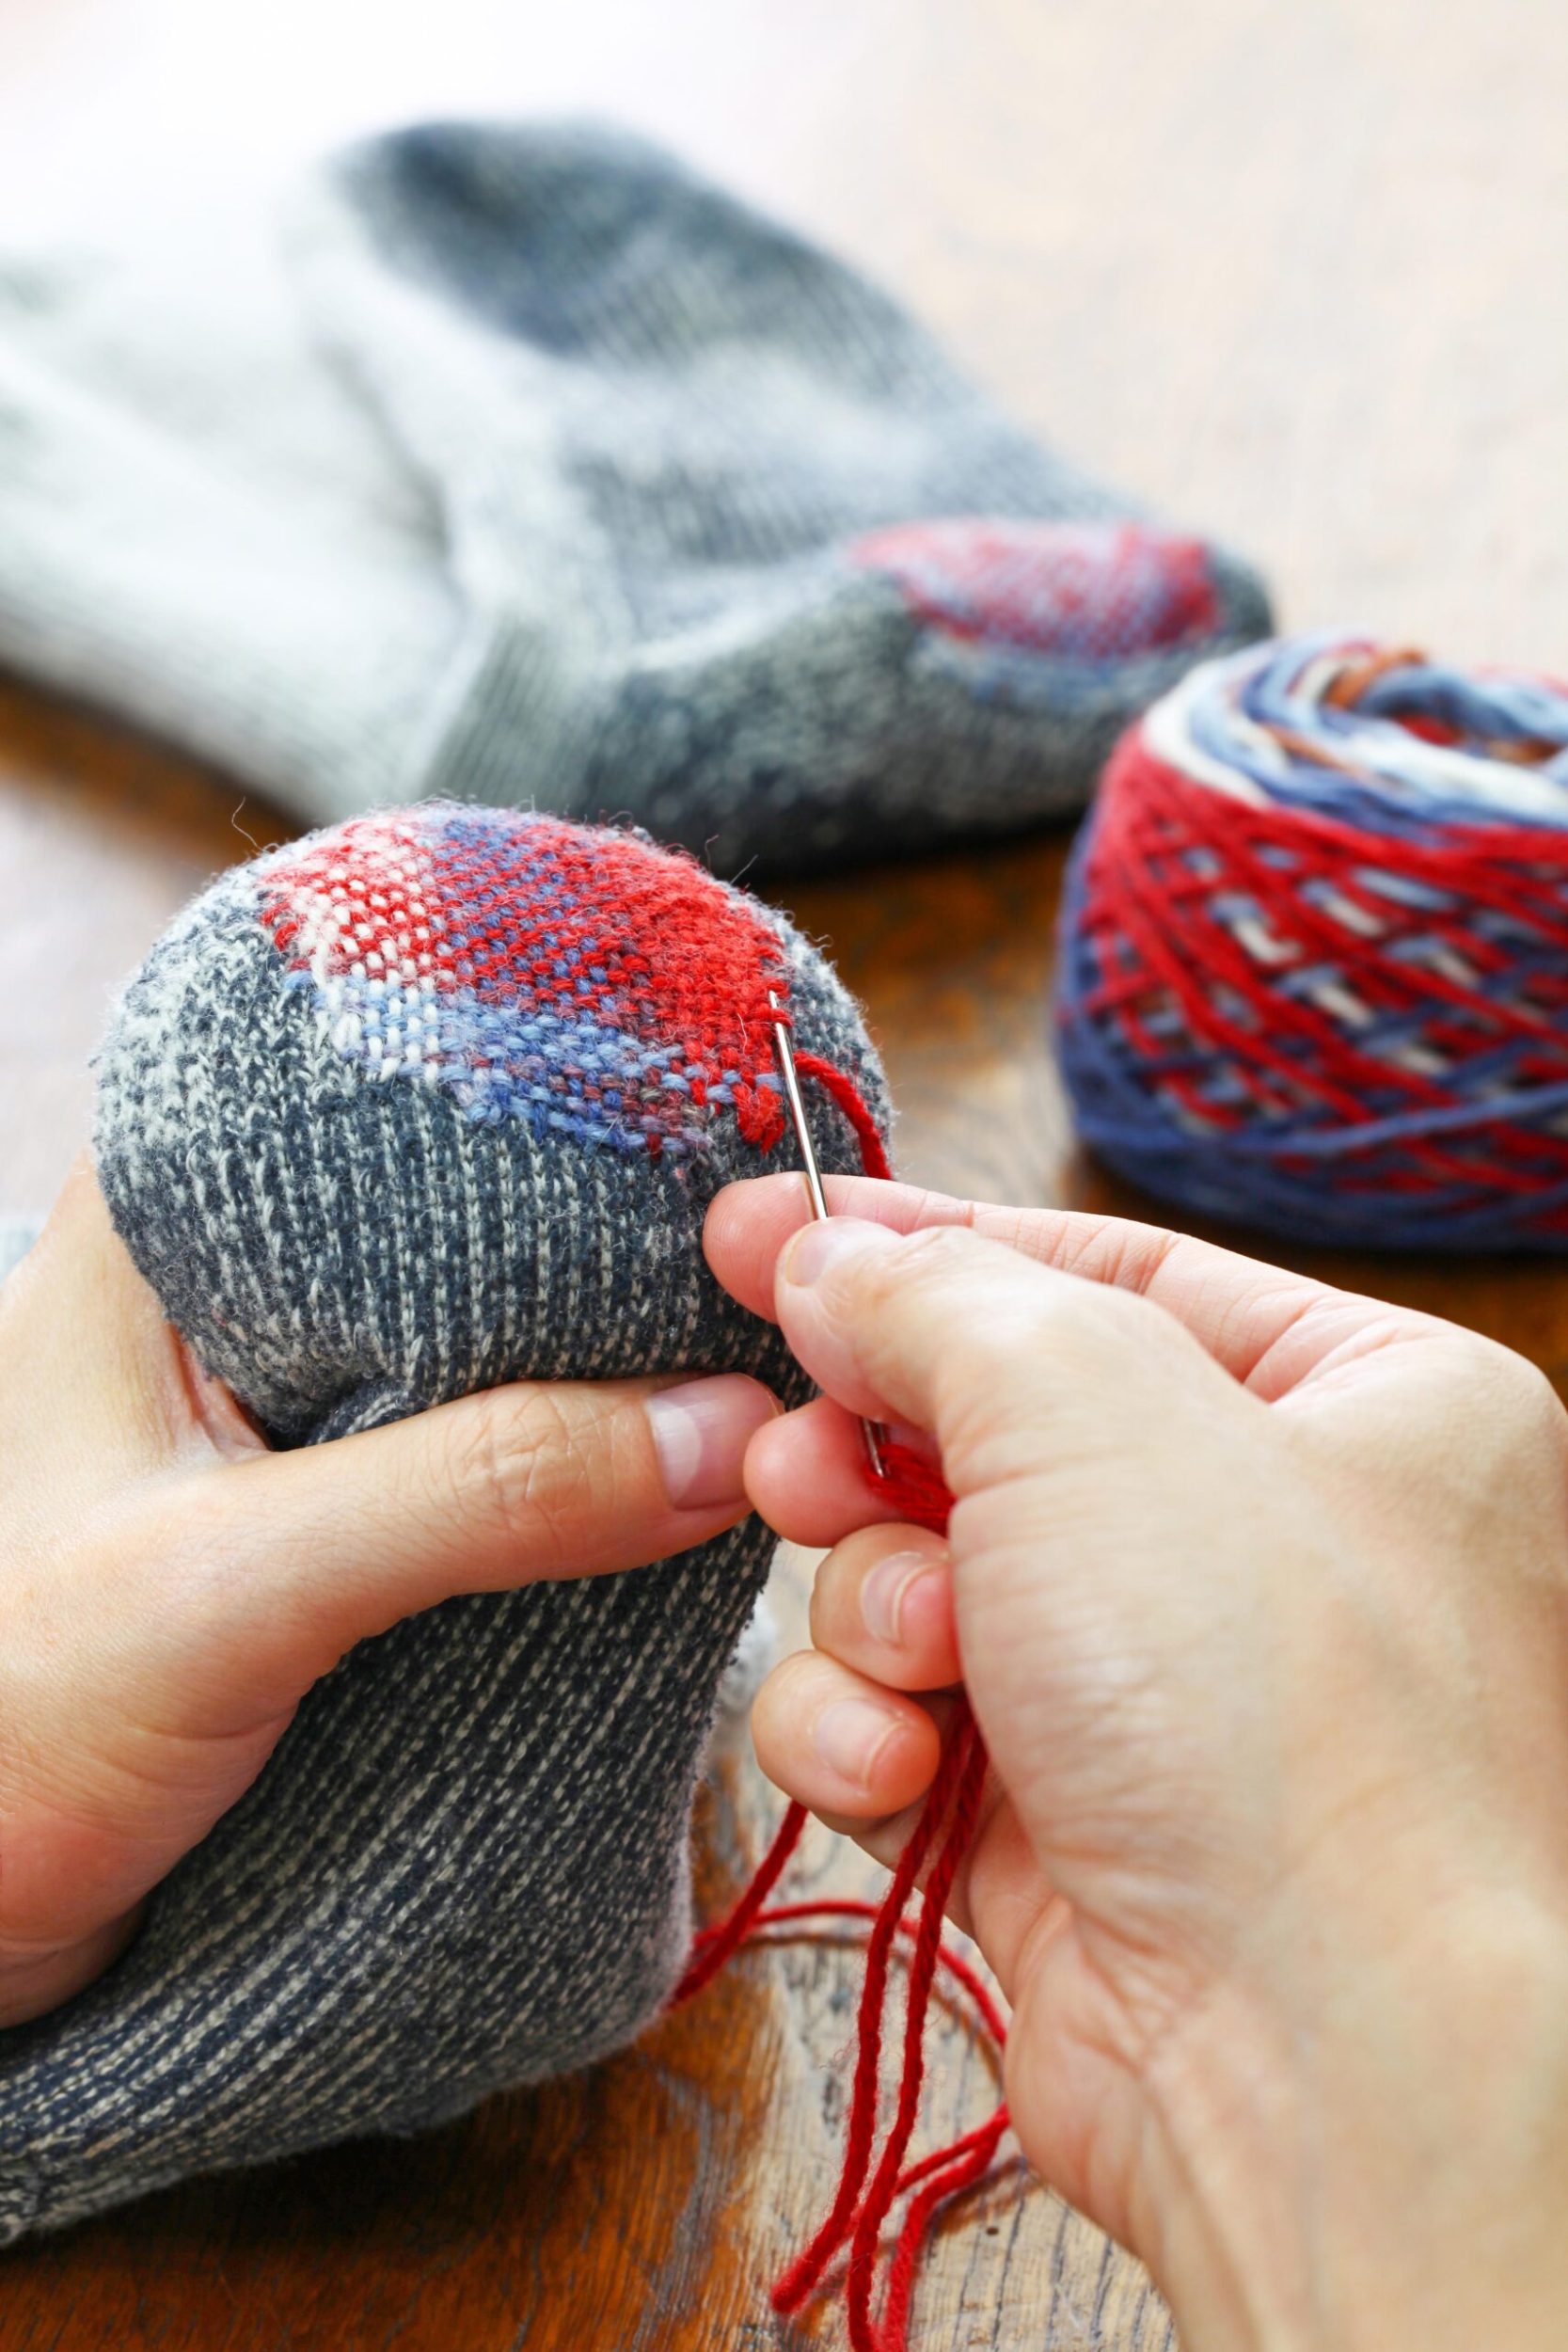 Hands darling blue socks with red thread